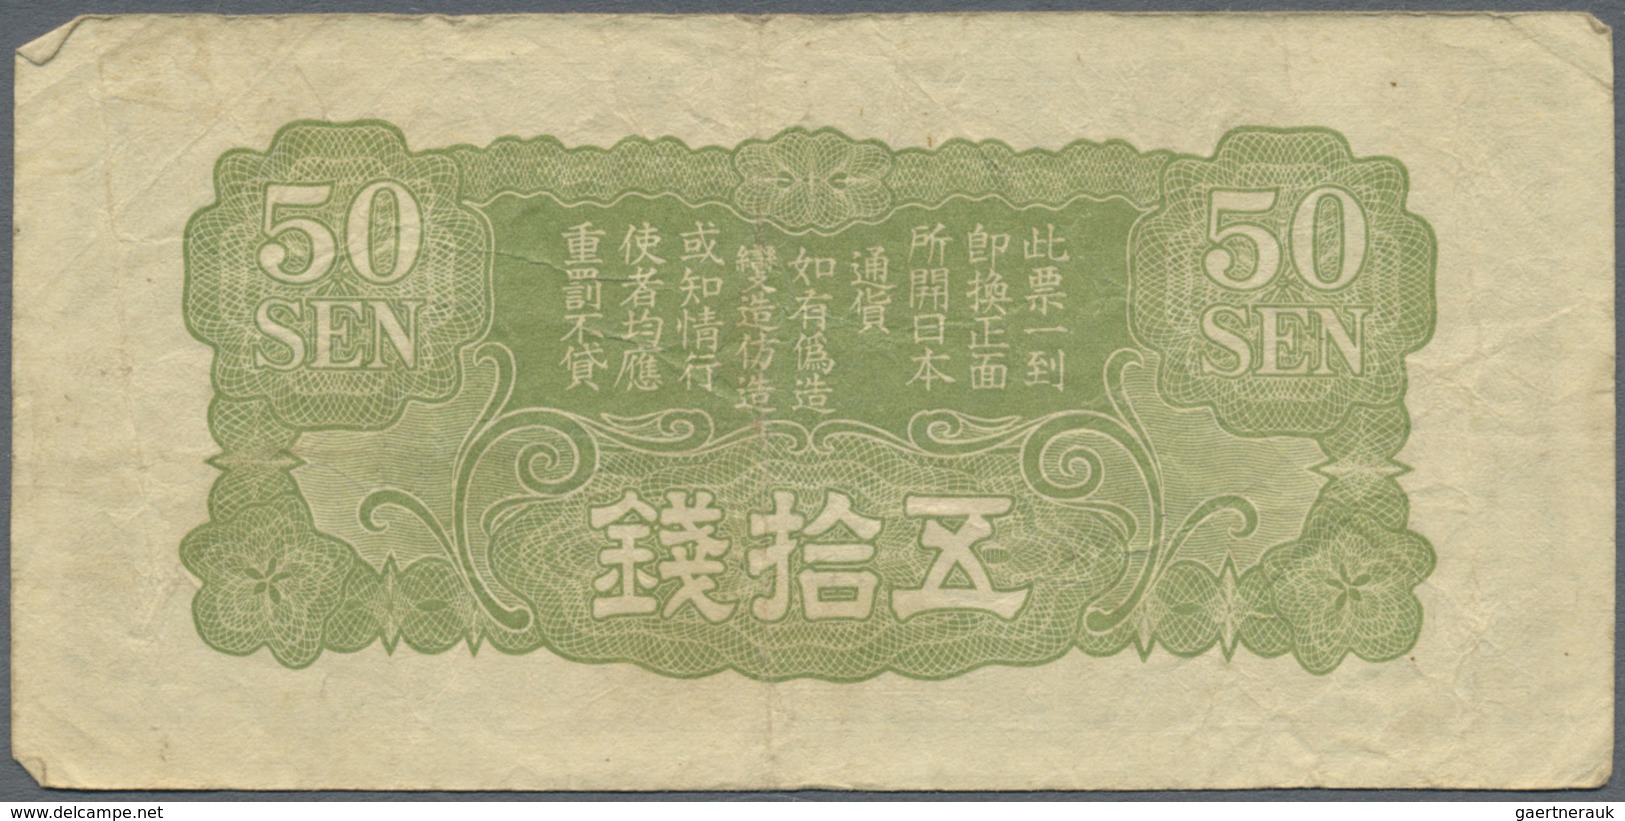 China: 1945/1980 (ca.), ex Pick 379-882, Pick FX 1-3, Pick M 13 and others, quantity lot with 1202 B